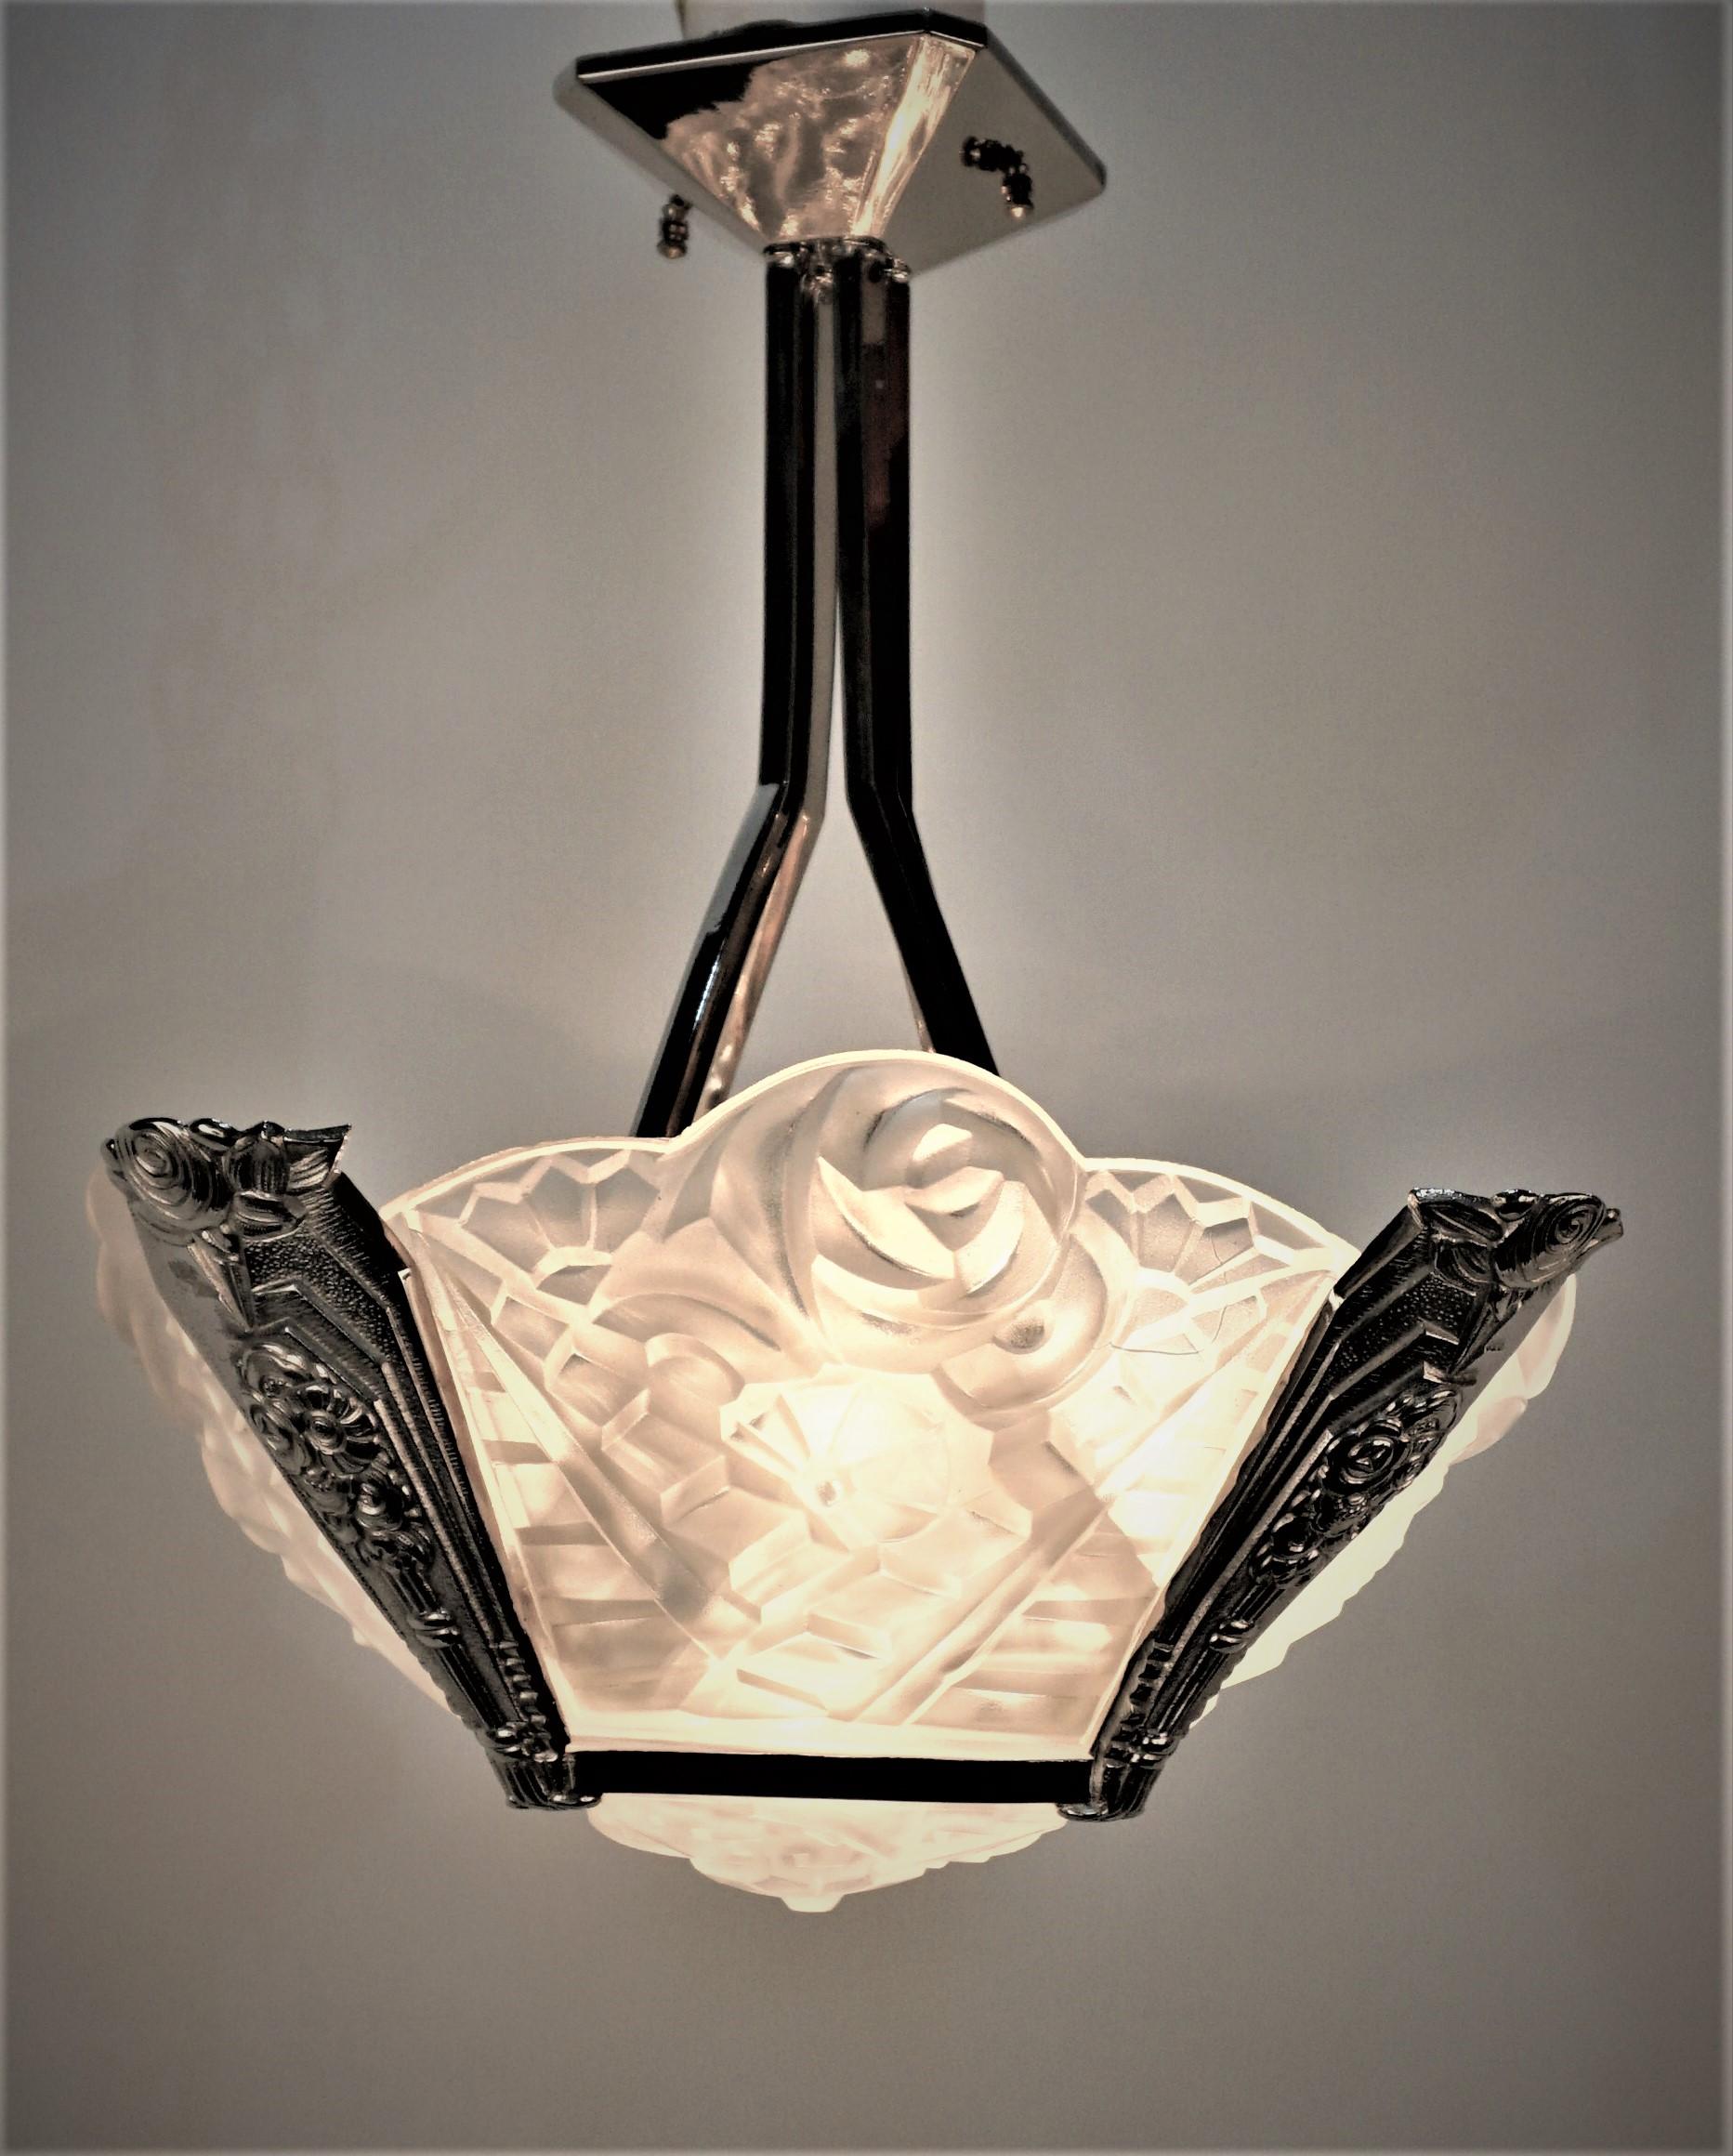 French Art Deco chandelier by Degue. Four clear frosted floral design surrounding a matching center panel with nickel on bronze deco design frame. 
Professionally rewired and ready for installation.